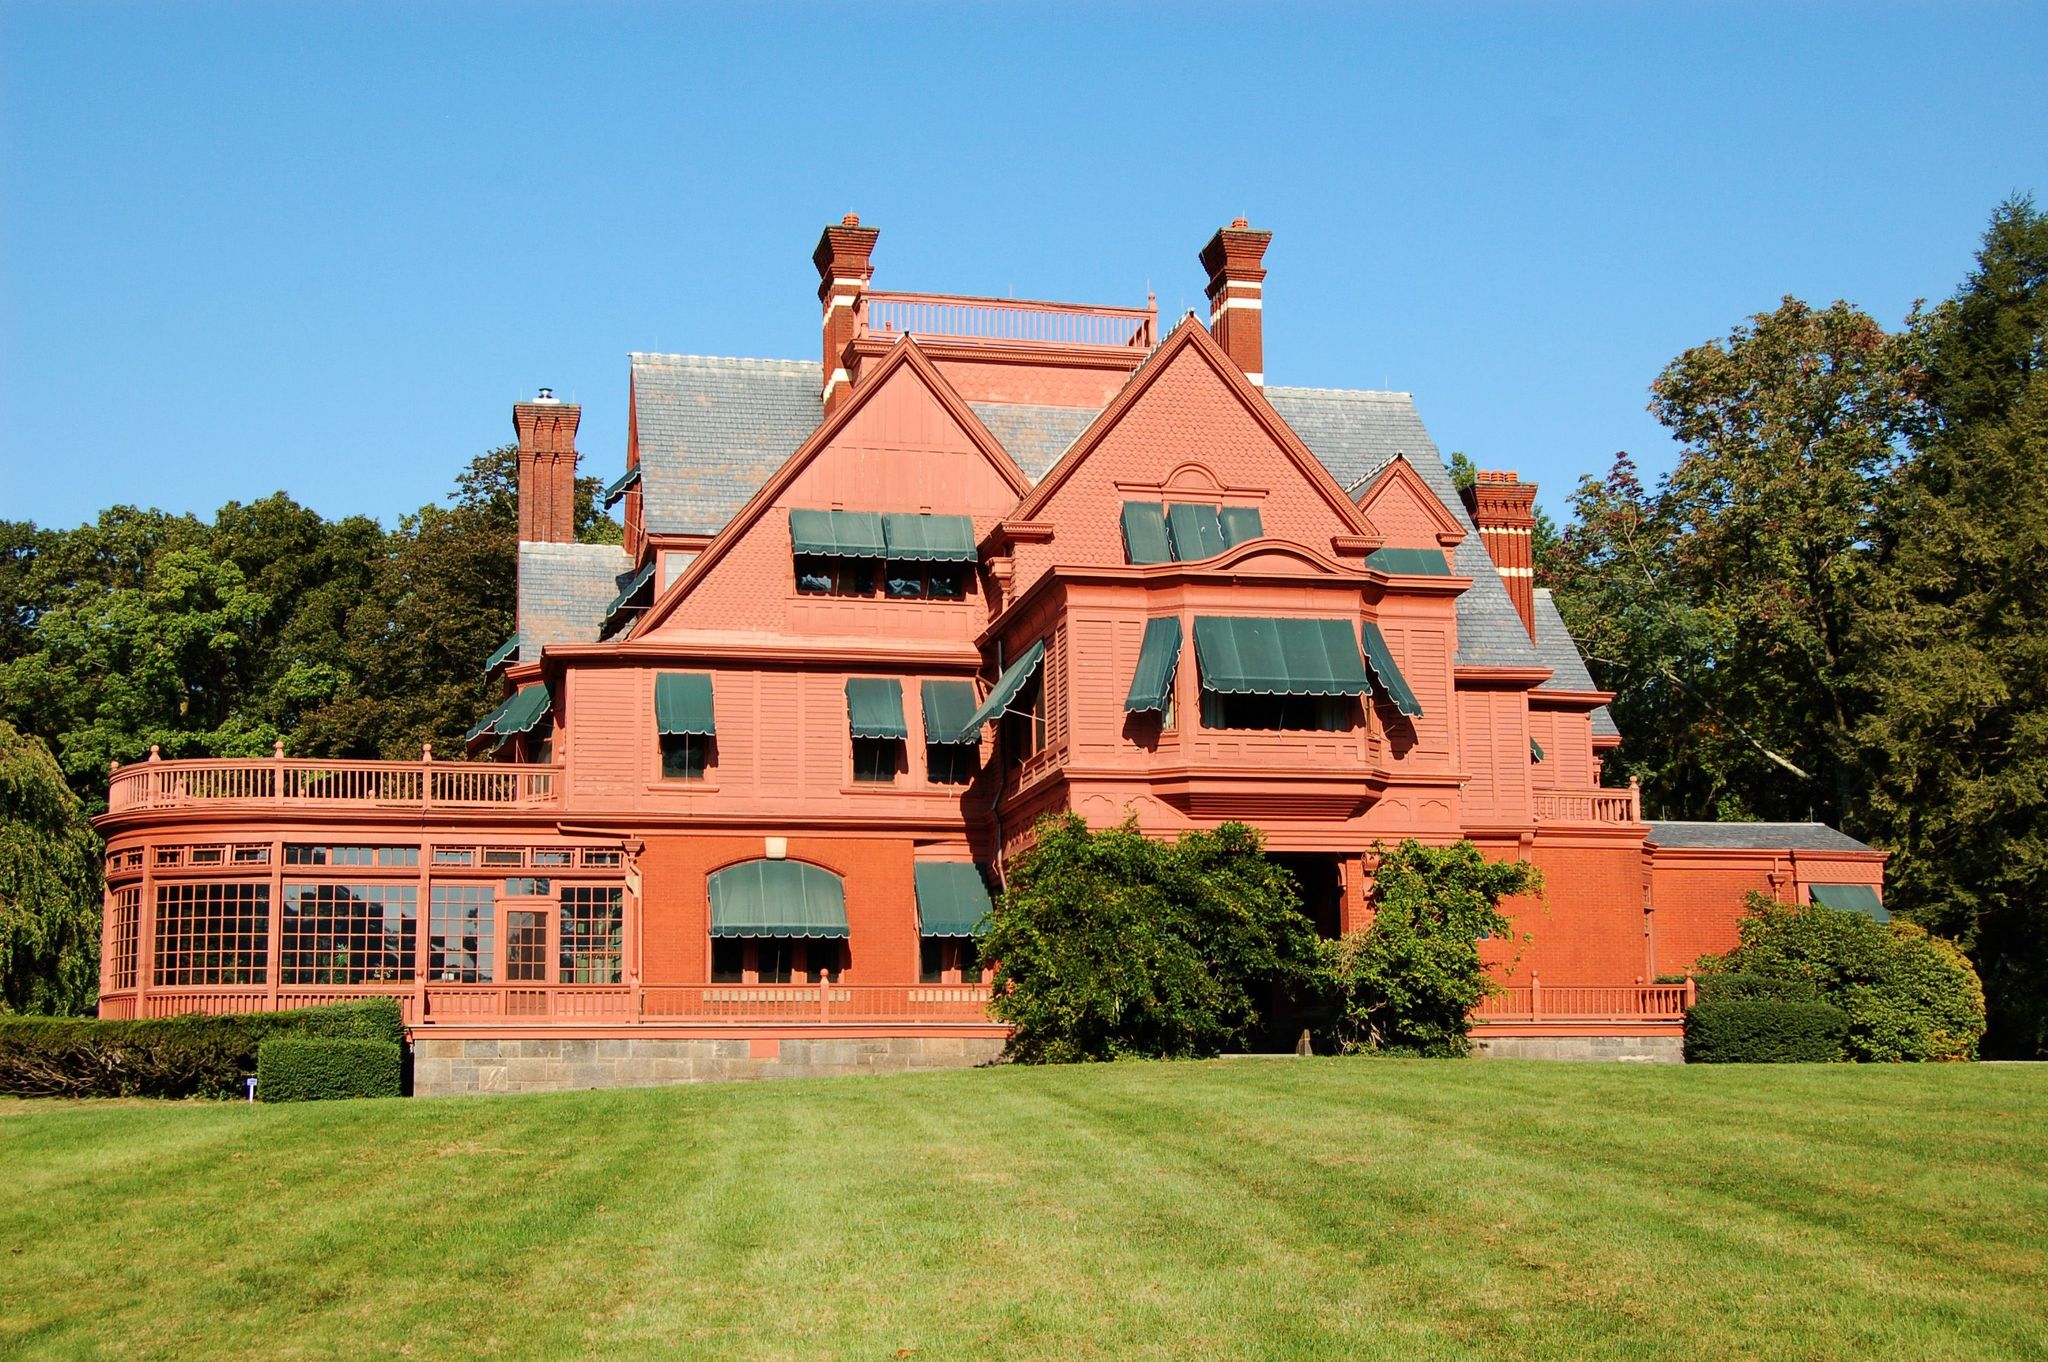 Thomas Edison purchased Glenmont as a wedding present for his wife Mina in 1886, for the cost of $125,000 USD.